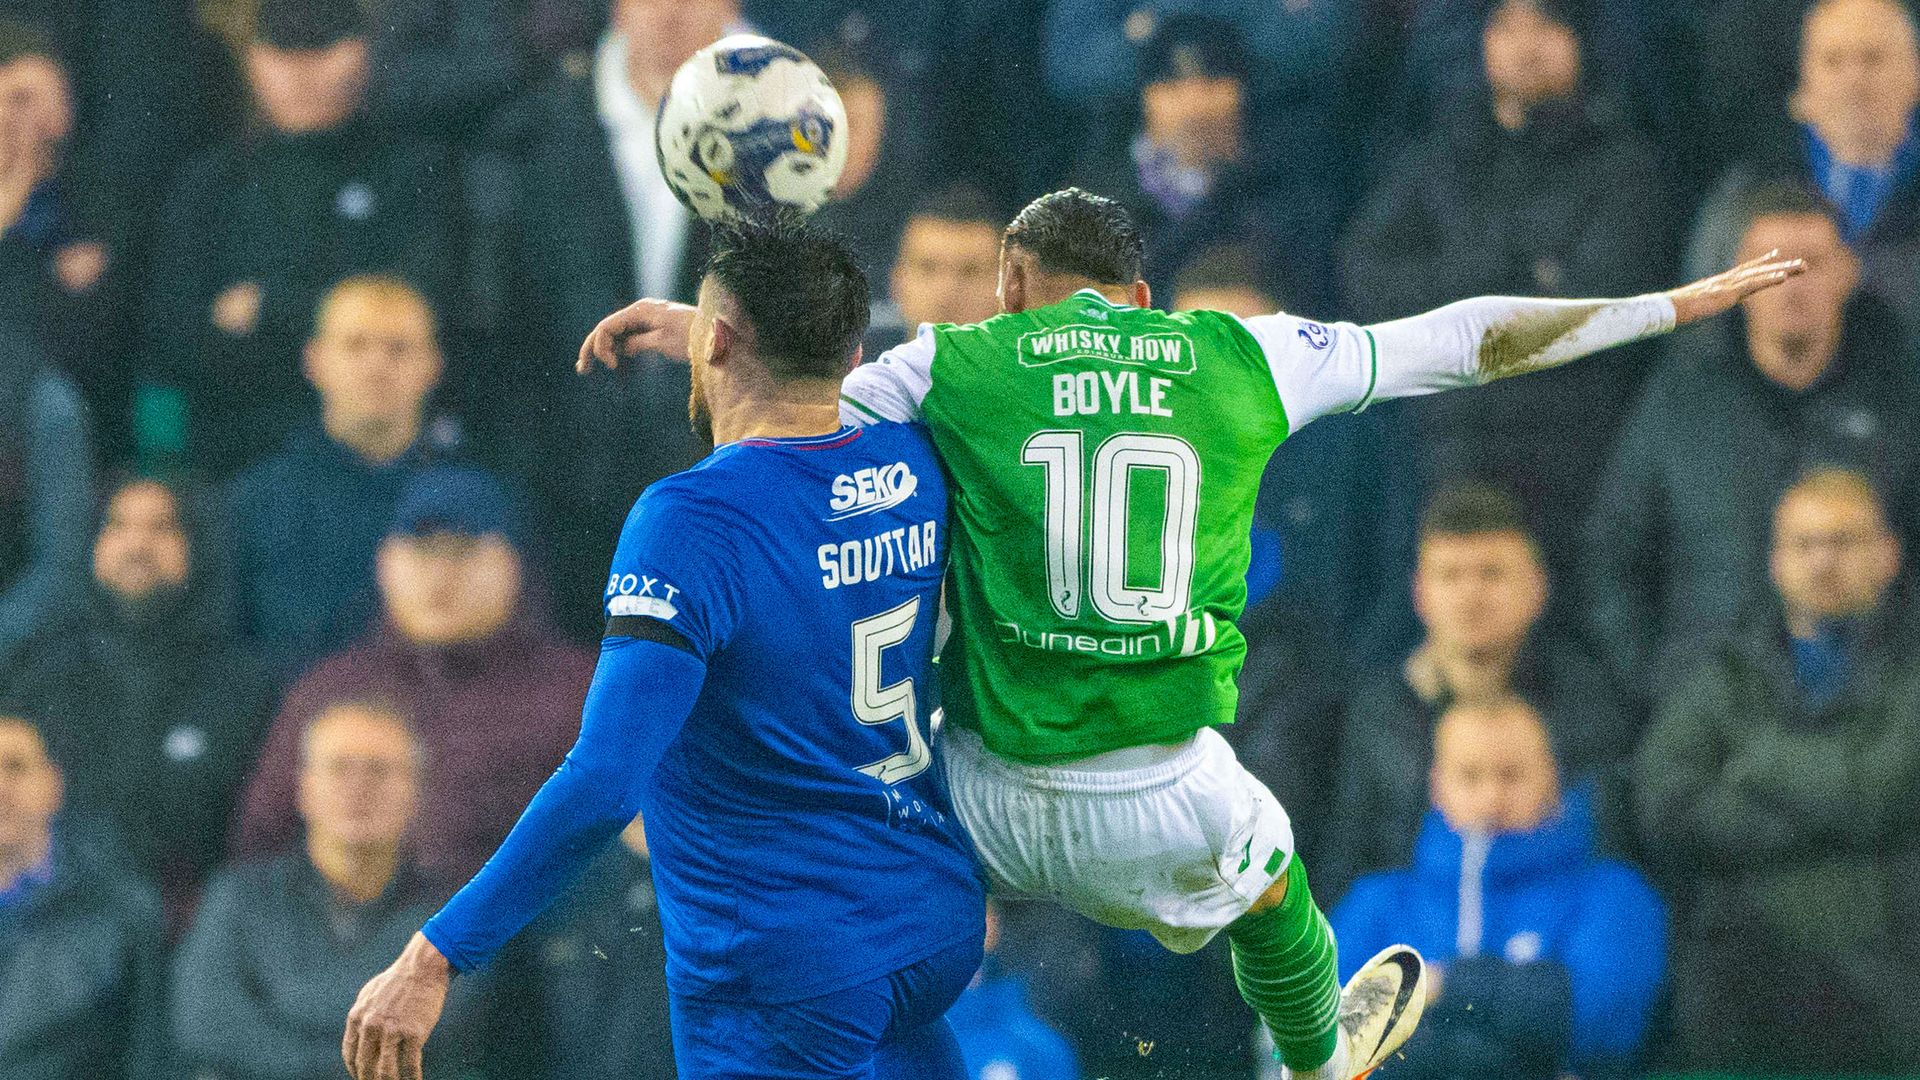 Hibs' Boyle home from hospital after suffering a concussion